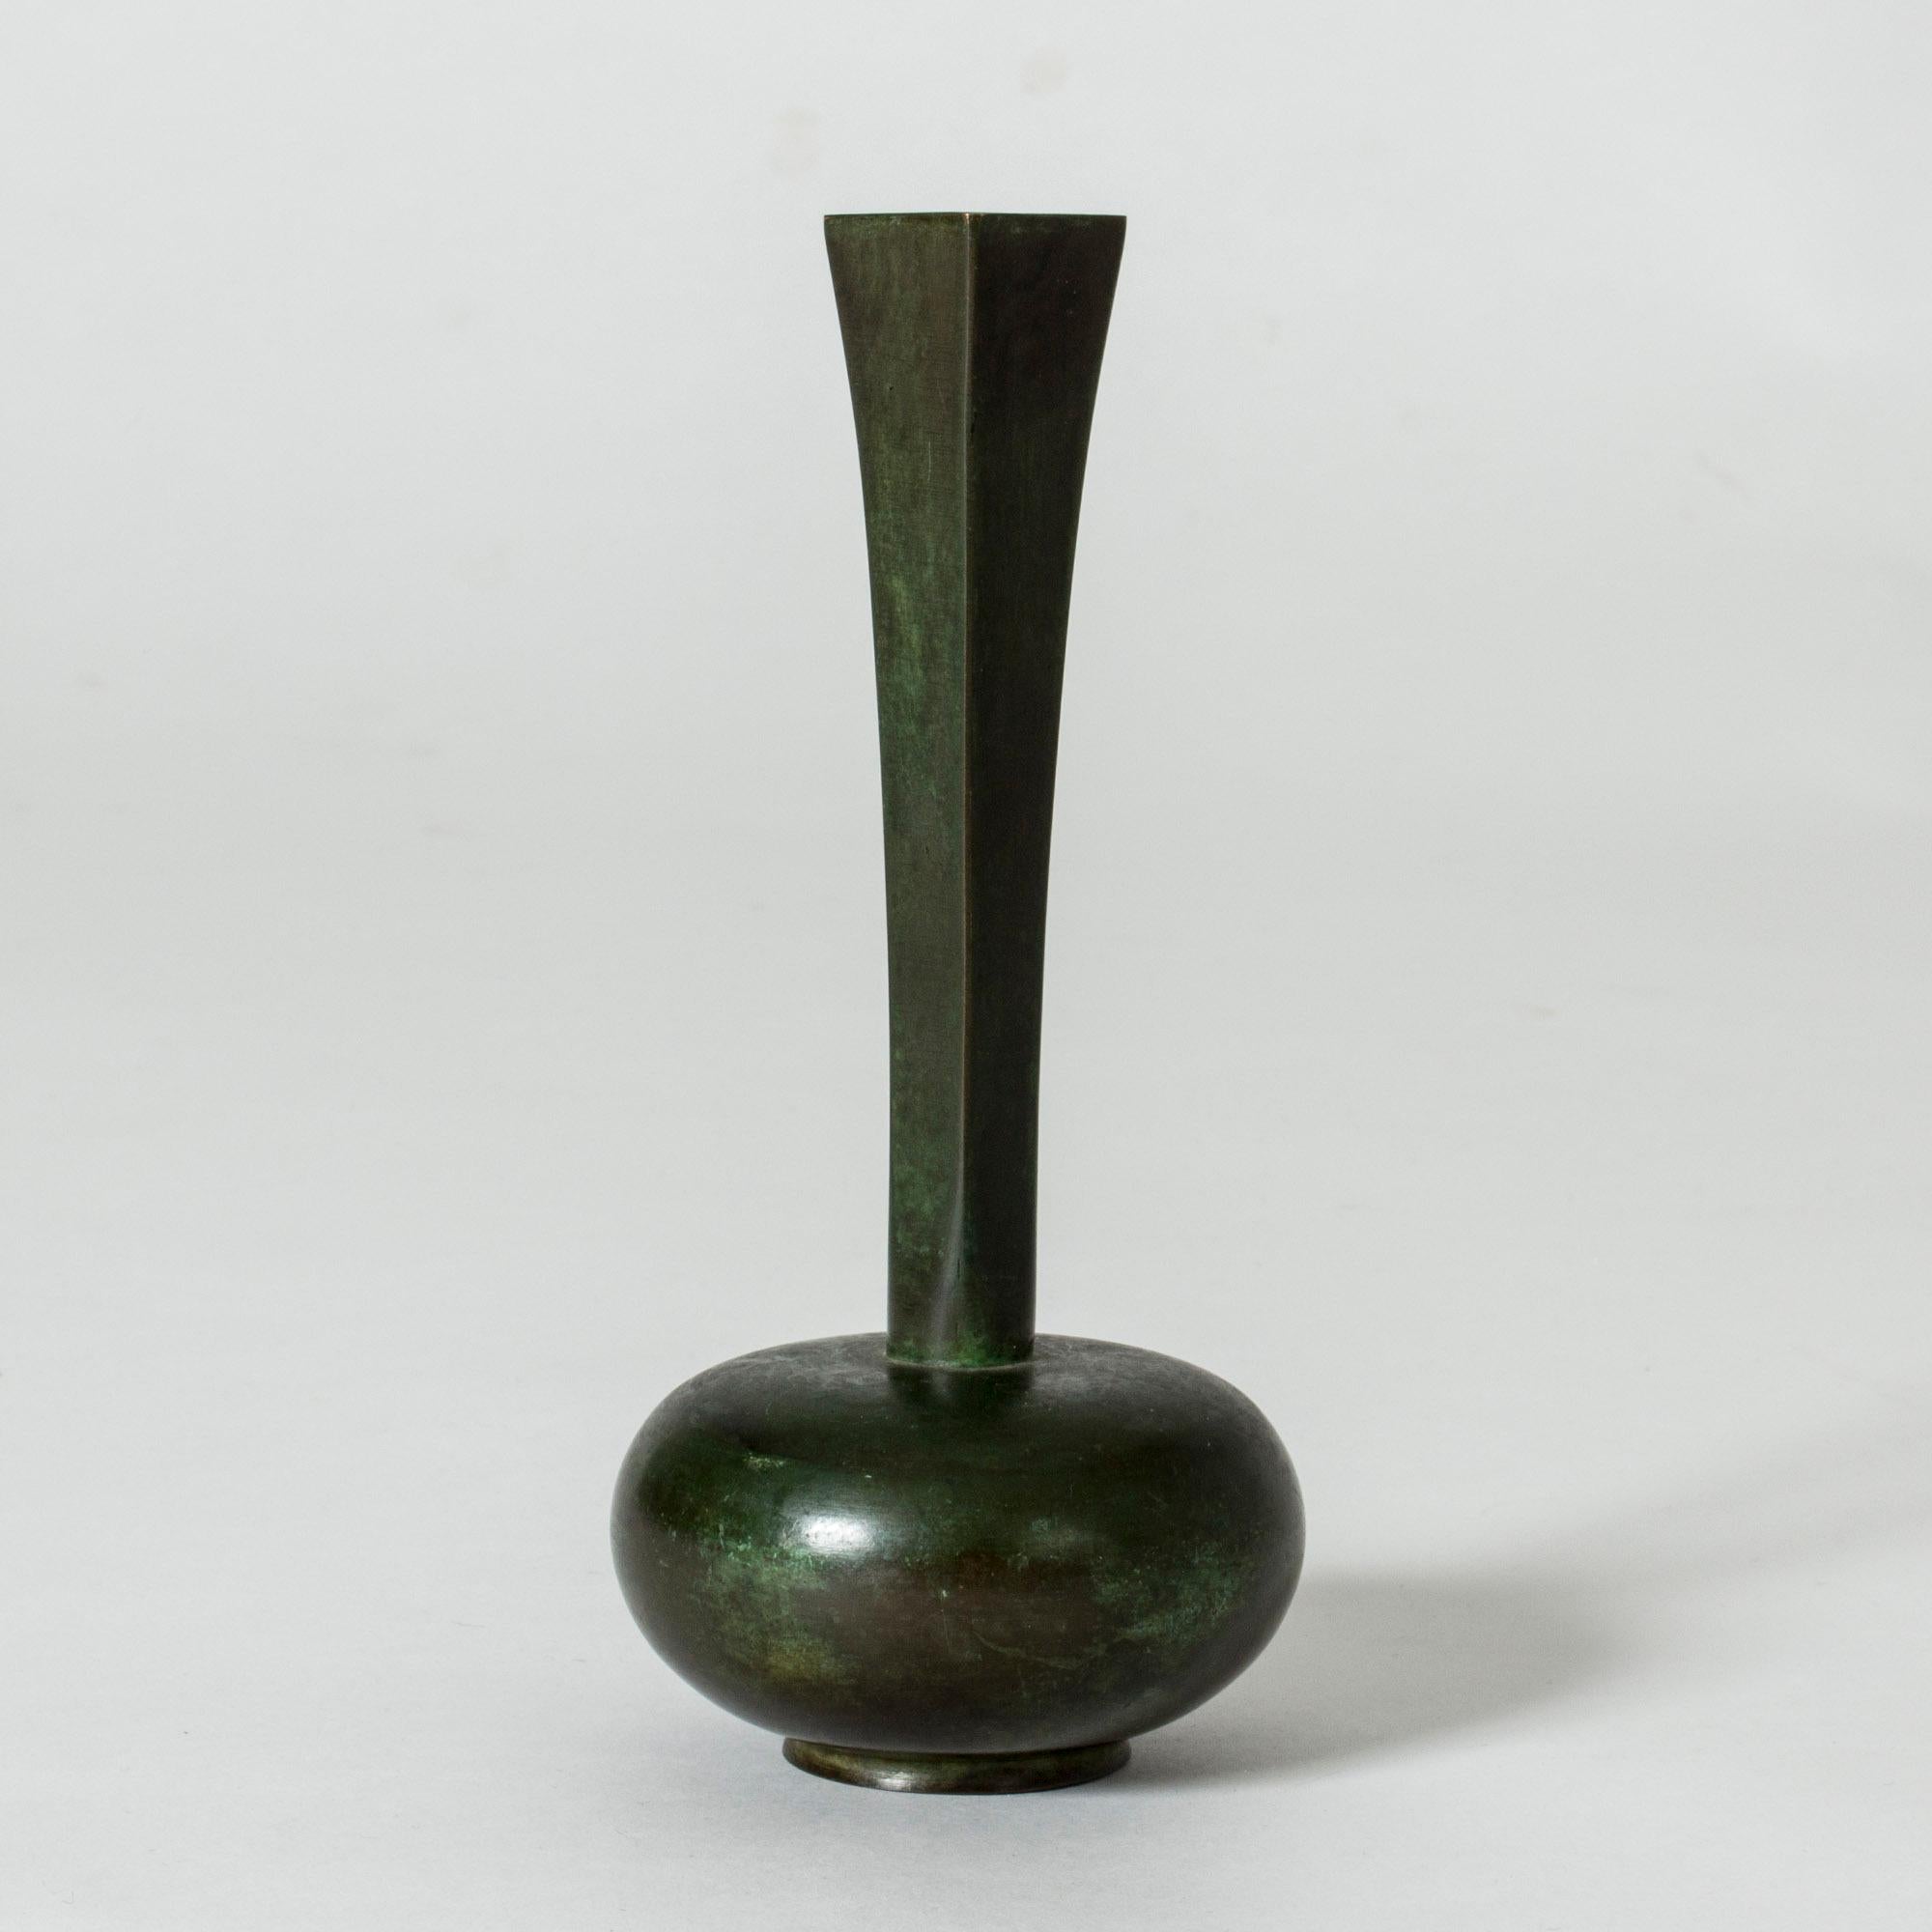 Beautiful bronze vase from GAB, patinated dark green in varying nuances. Plump base contrasted with a slender, tapering neck.